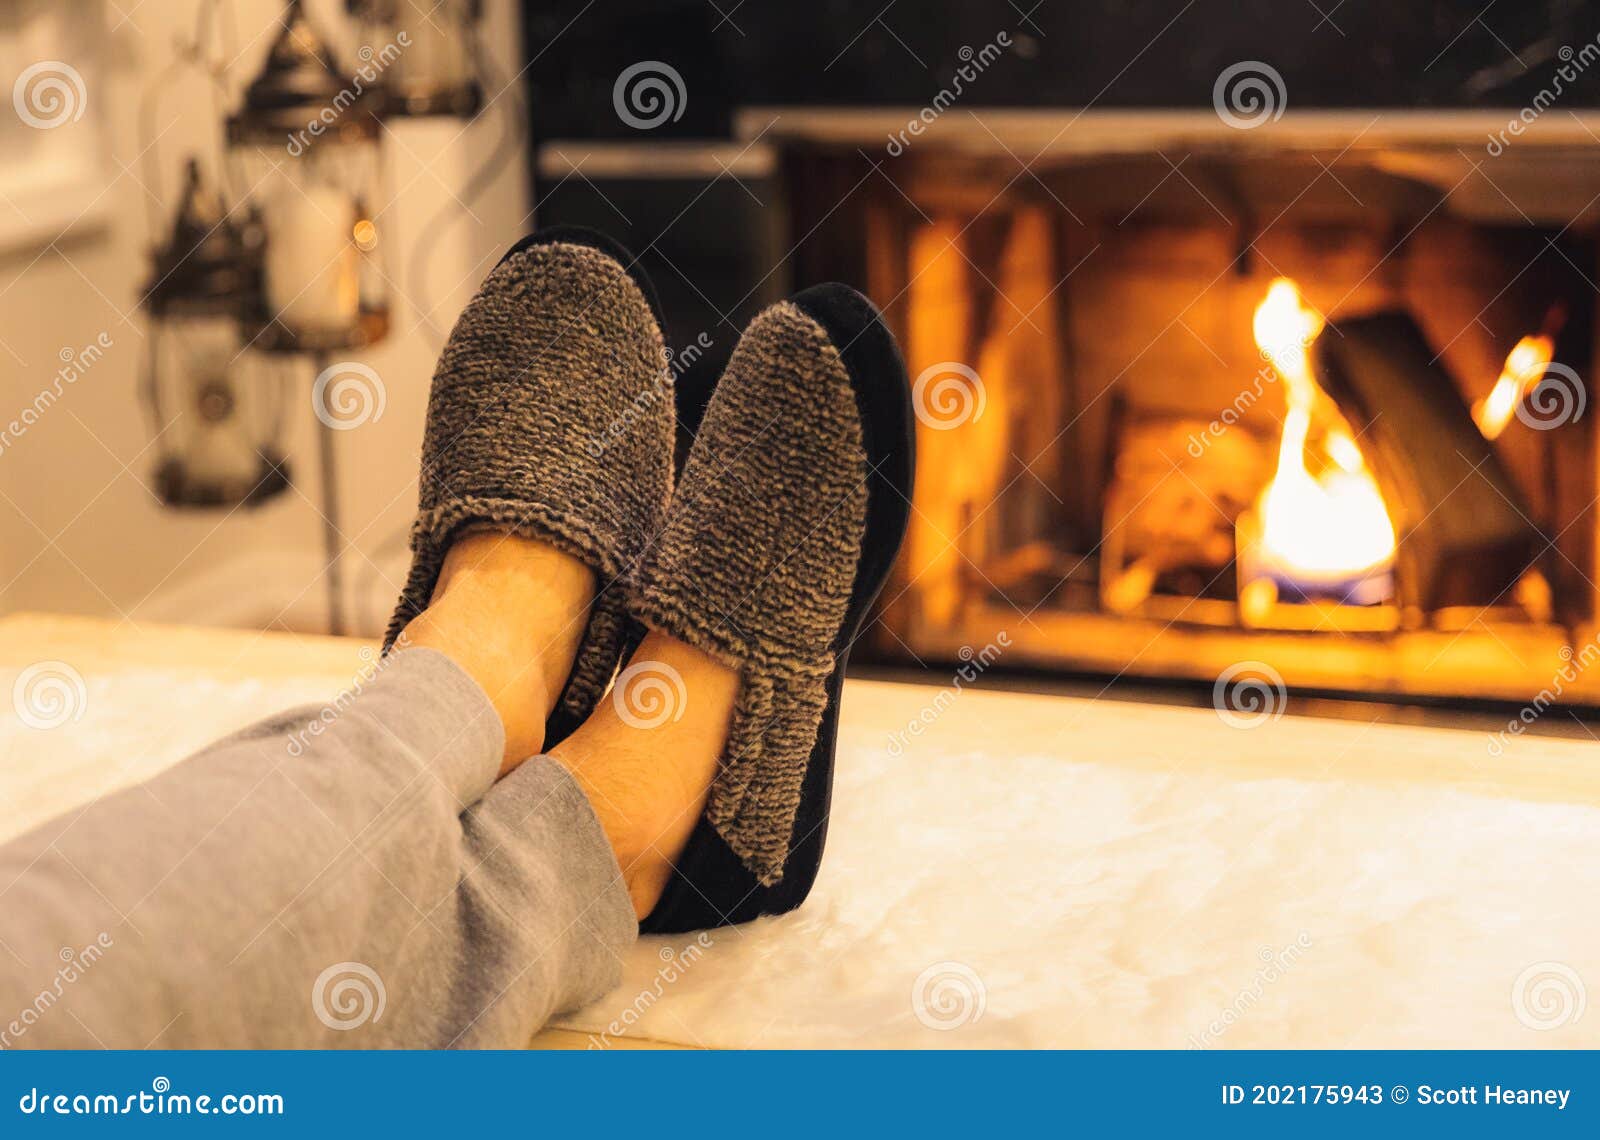 man in slippers relaxing with his feet up with a fireplace in the background.